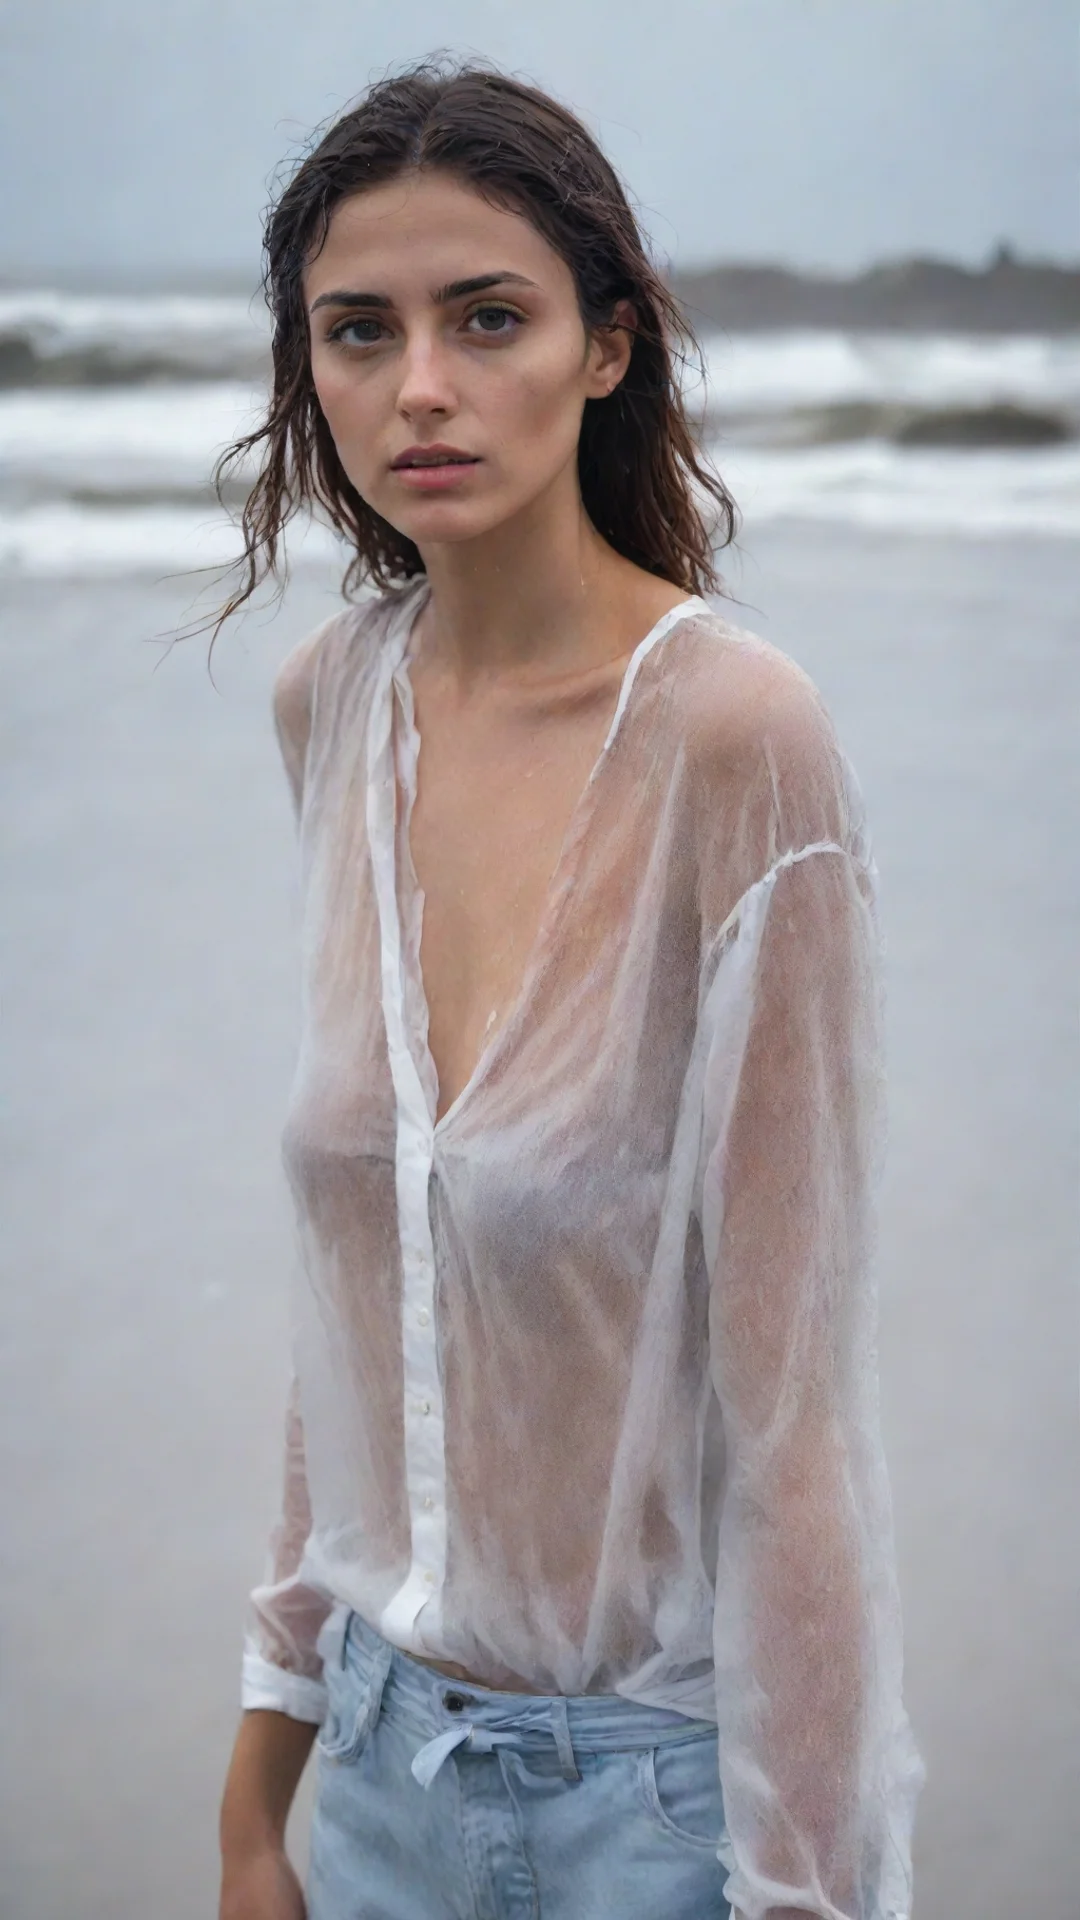 aiamazing sensual portrait of a lonely young italian woman in a thin transparent white shirt at a wet and rainy beach good looking trending fantastic 1 awesome portrait 2 tall